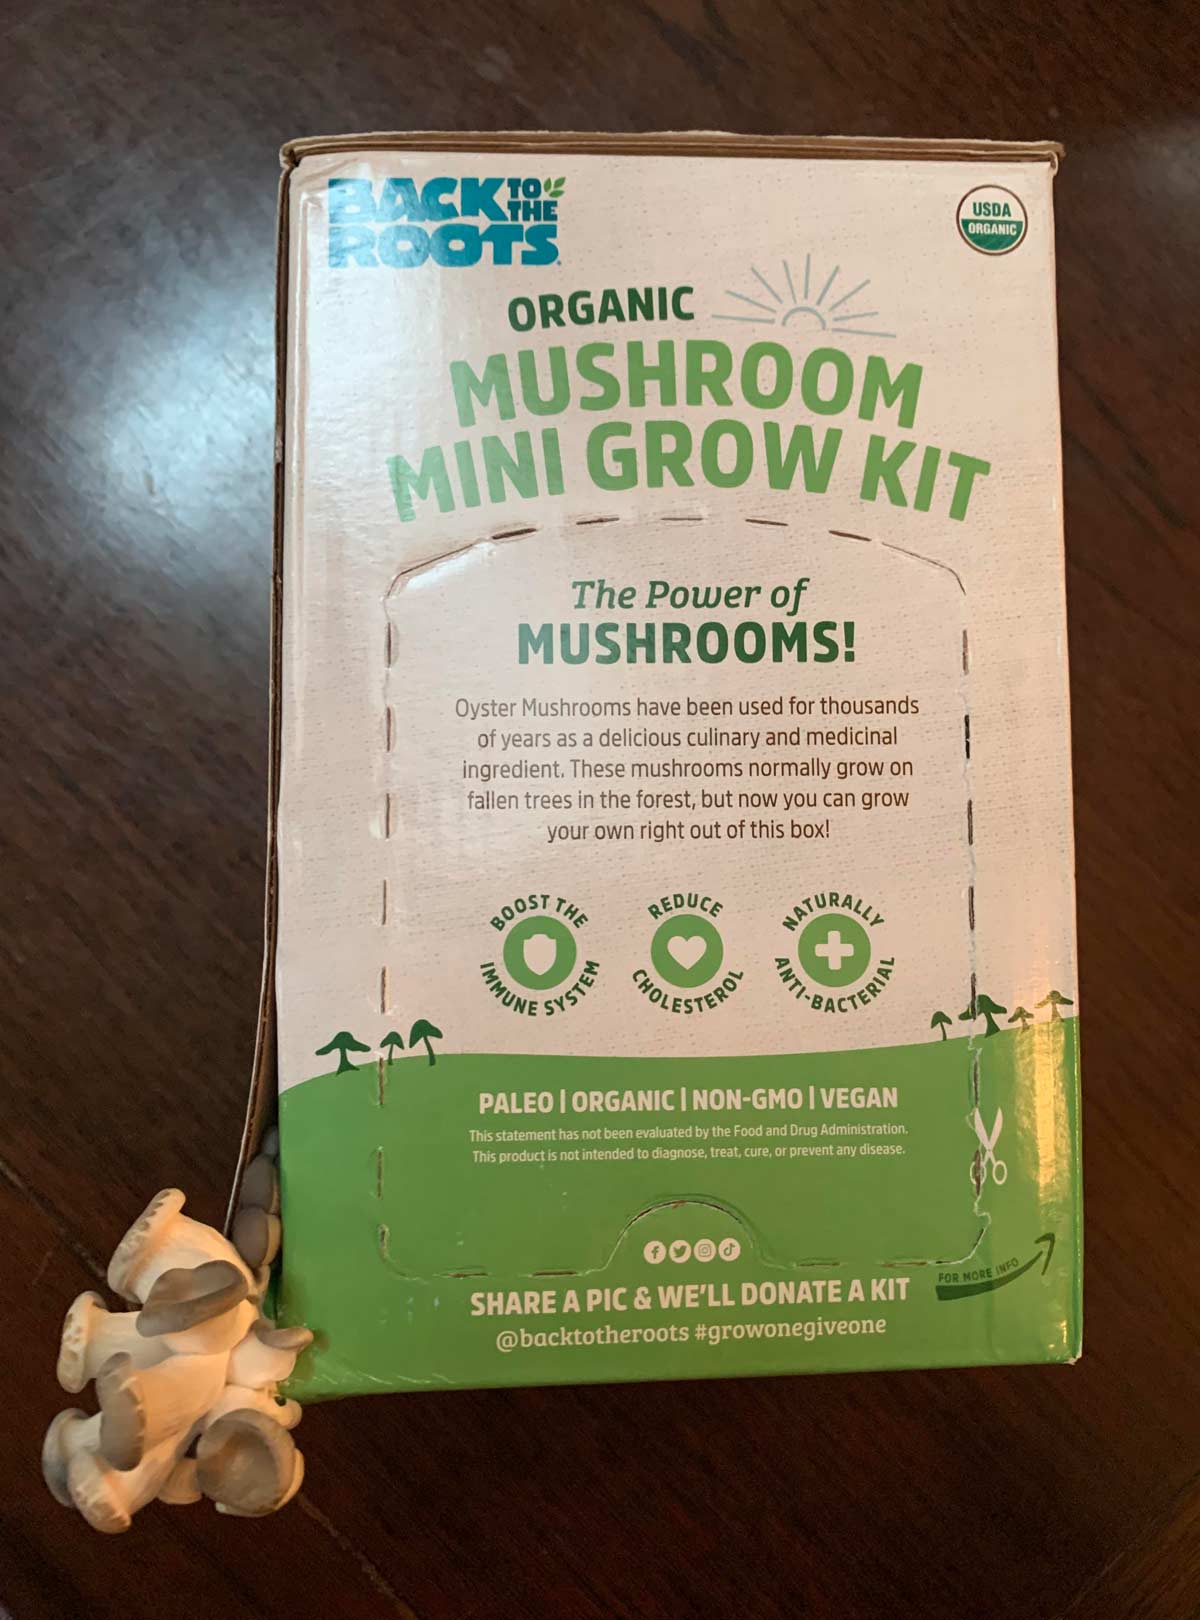 My mushroom growing kit got tired of waiting for me to set it up properly